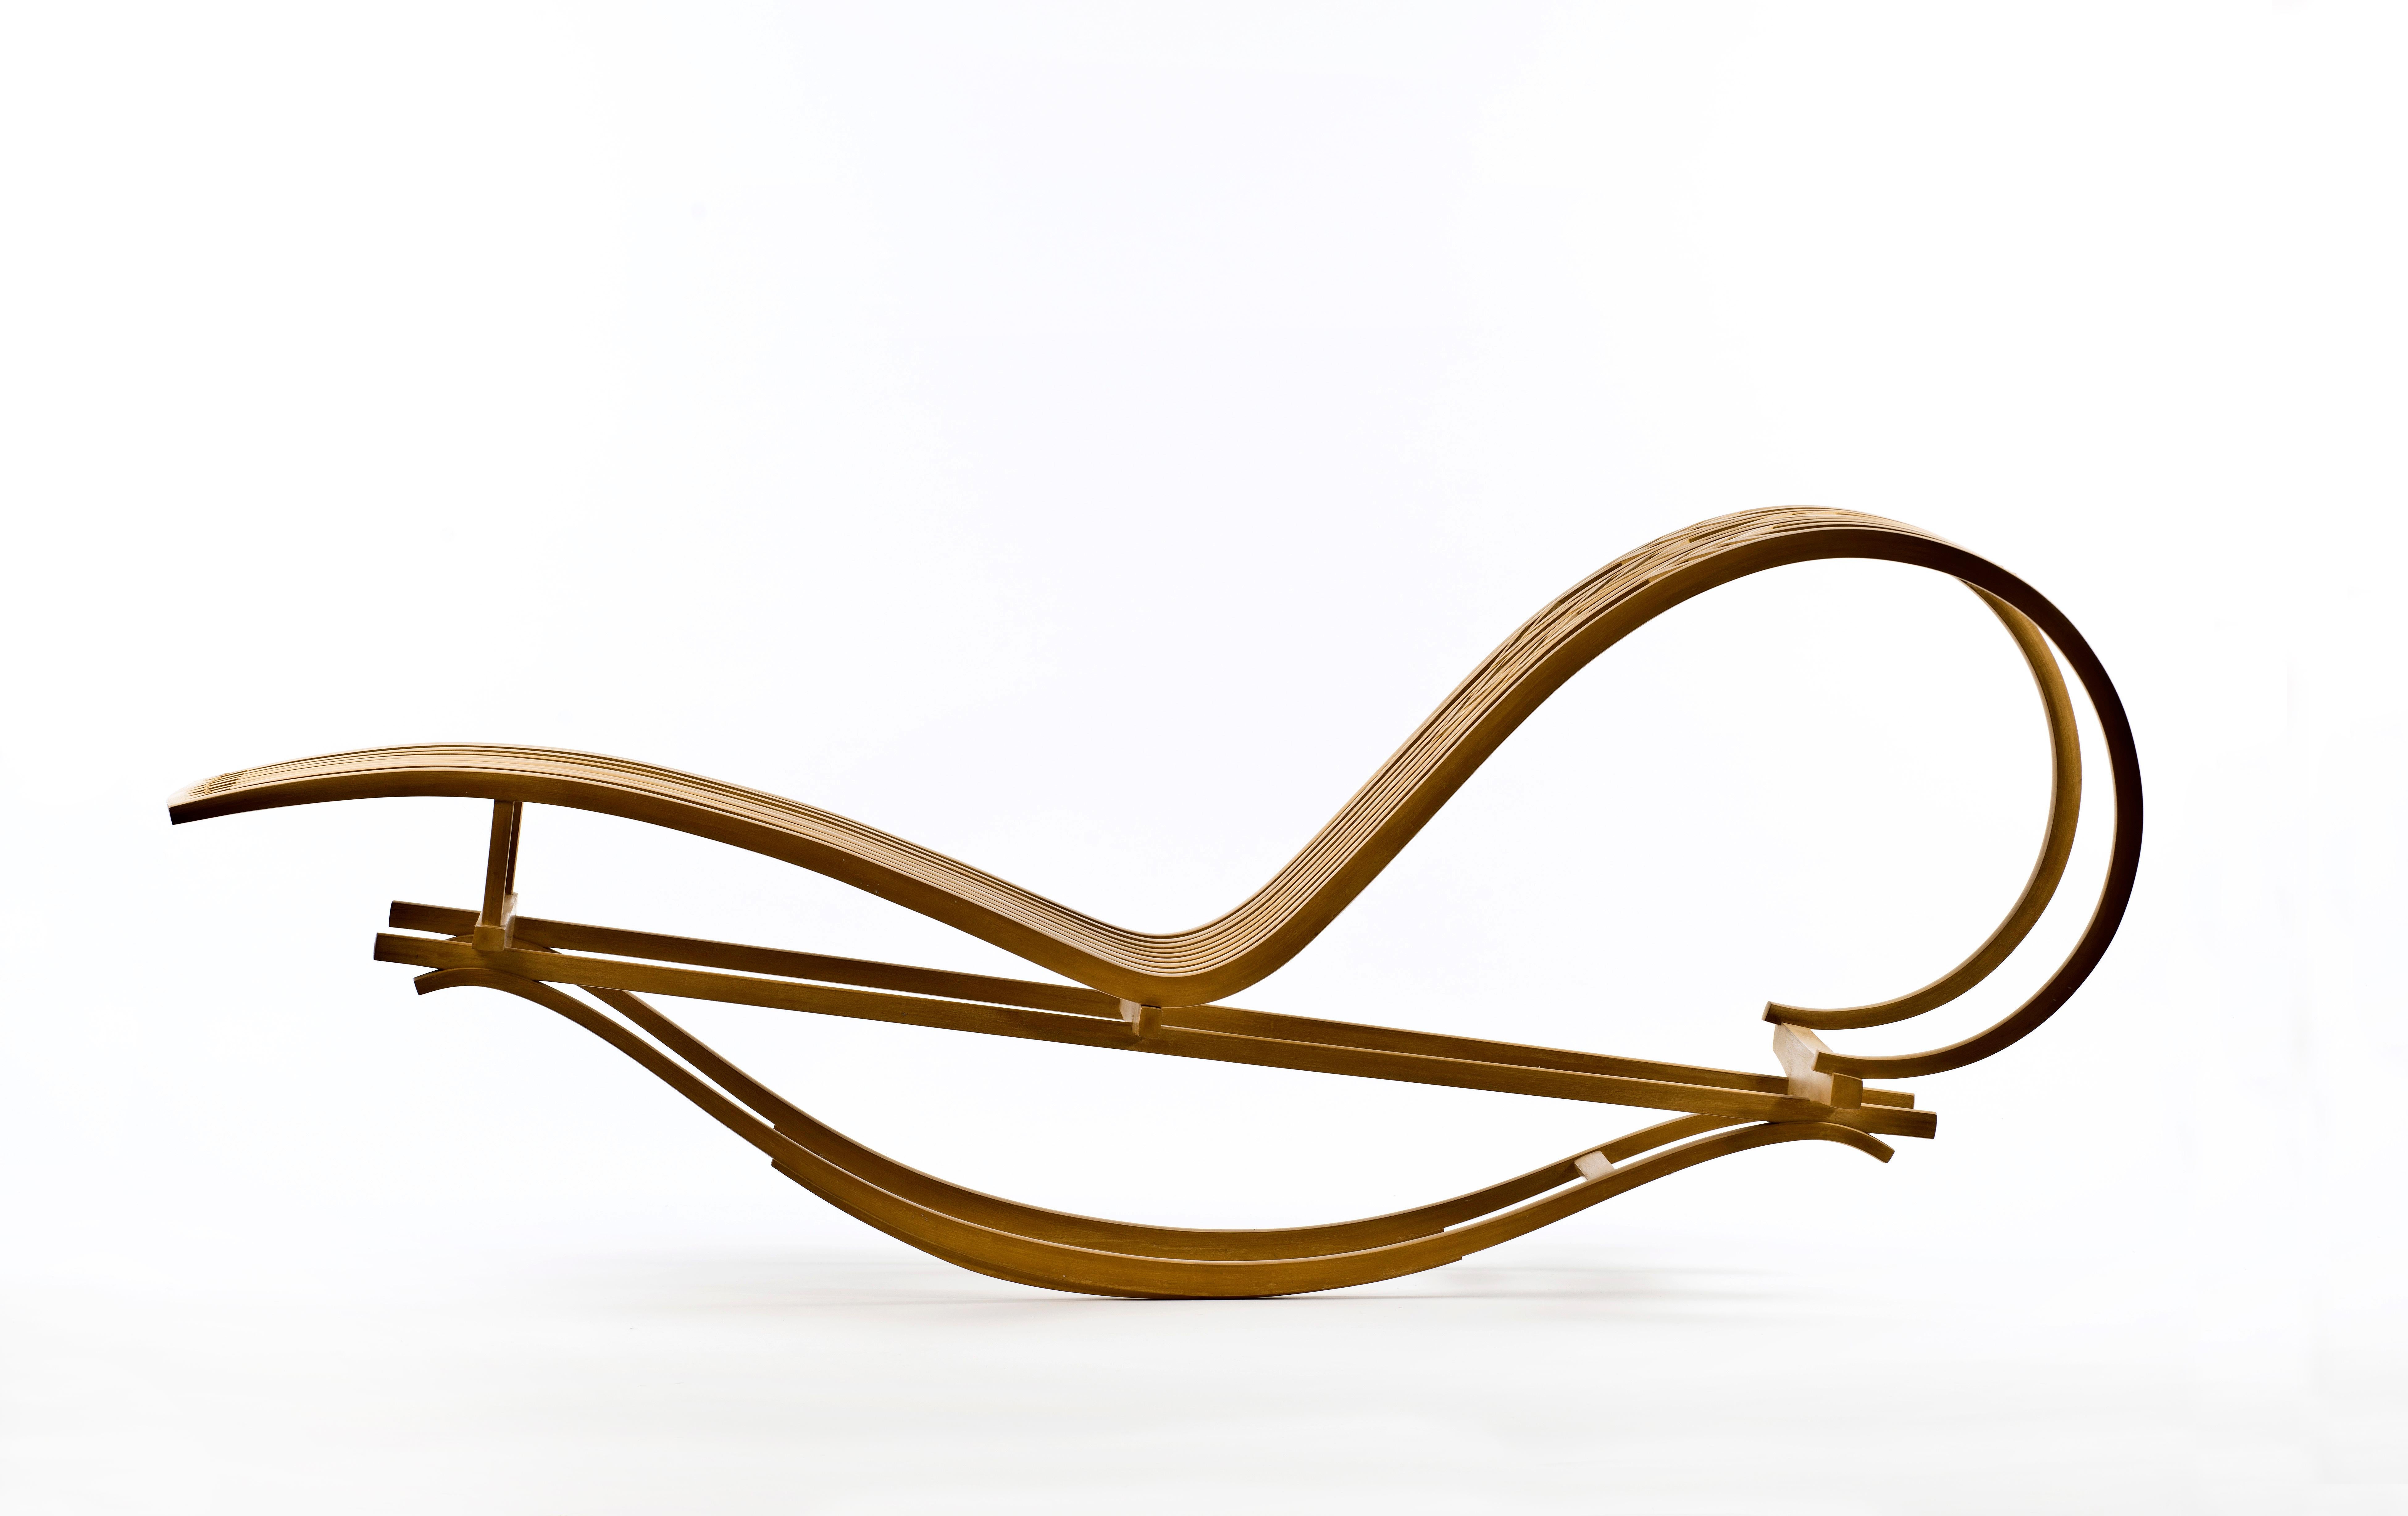 Michael Hurwitz
Bentwood Rocking Chaise Lounge, 1990
Mahogany
34.25 x 83 x 24 in

Michael Hurwitz has been making studio furniture since earning a BFA from Boston University’s Program in Artisanry in 1979 and was Head of the Wood Department at